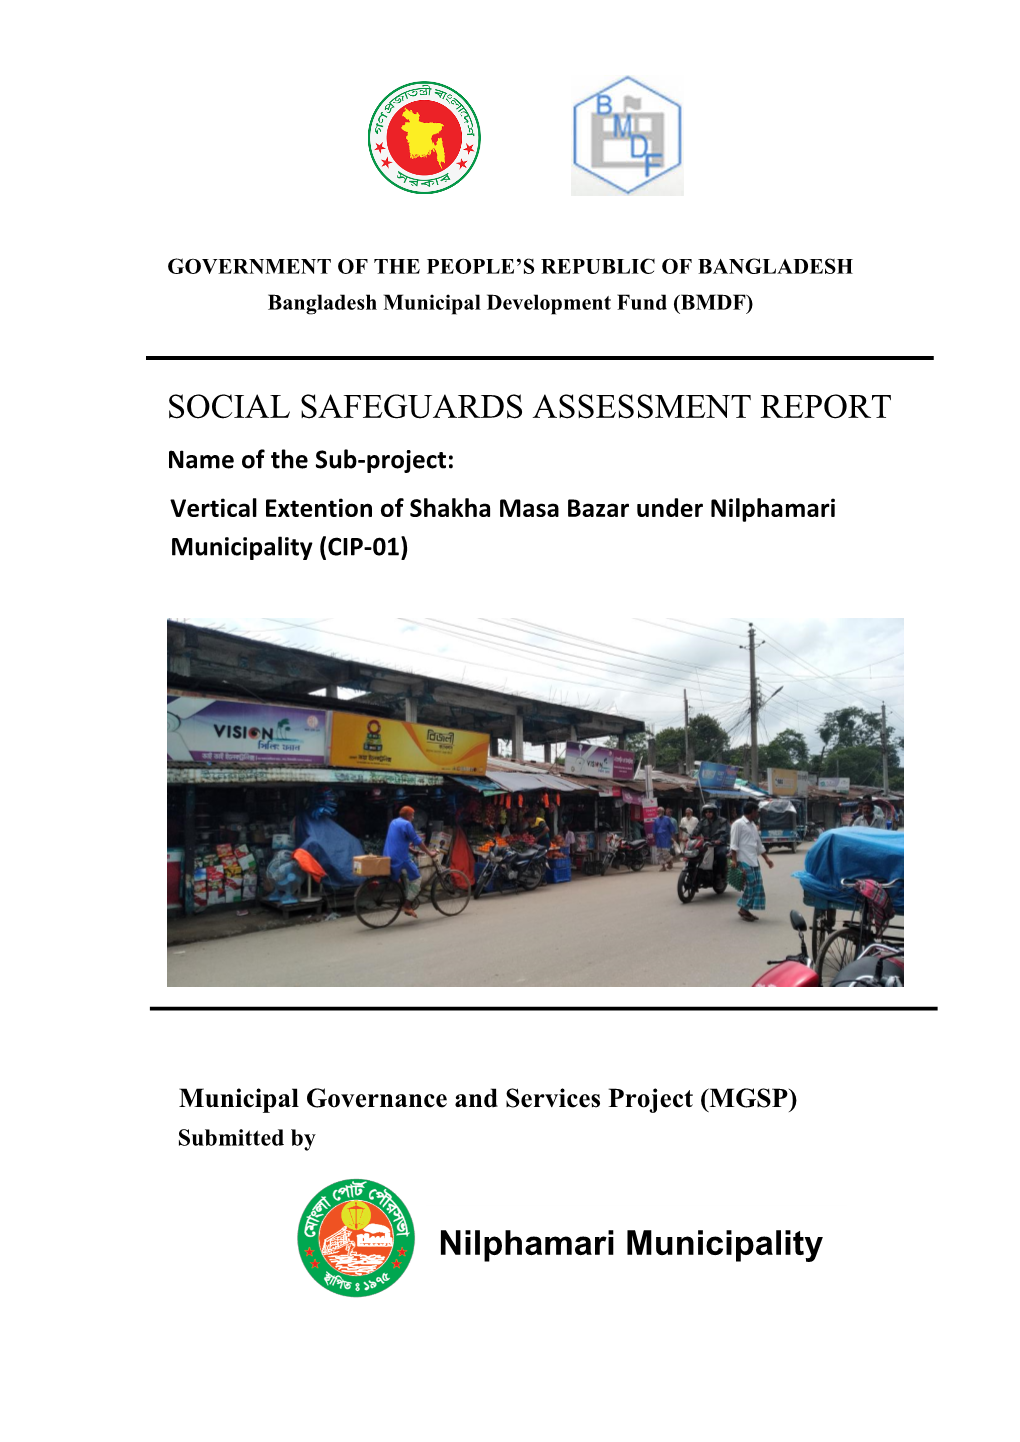 SOCIAL SAFEGUARDS ASSESSMENT REPORT Name of the Sub-Project: Vertical Extention of Shakha Masa Bazar Under Nilphamari Municipality (CIP-01)